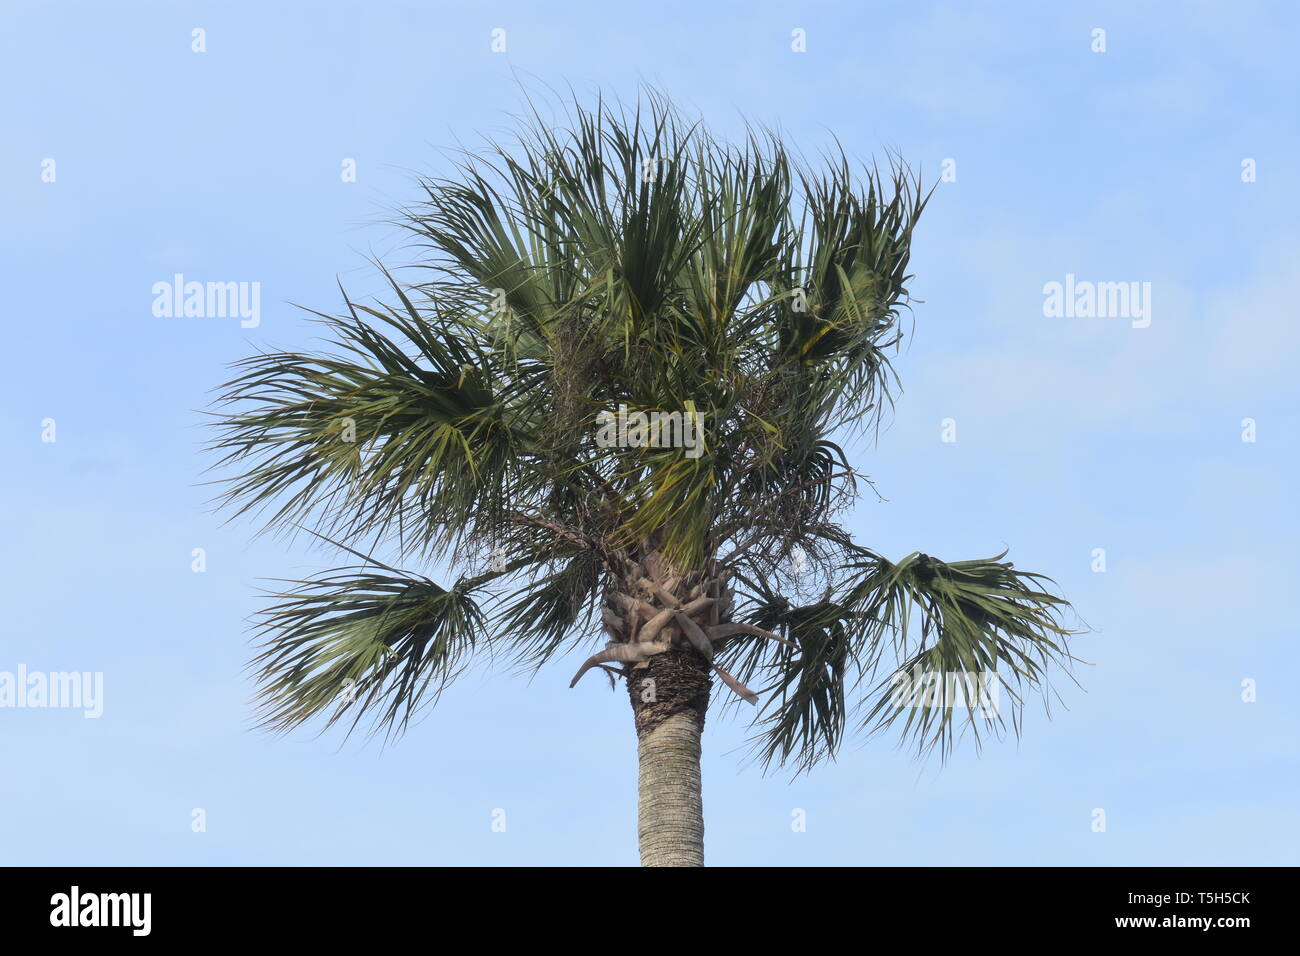 Isolated palm tree against a clear blue sky at St. Augustine, Florida, USA Stock Photo